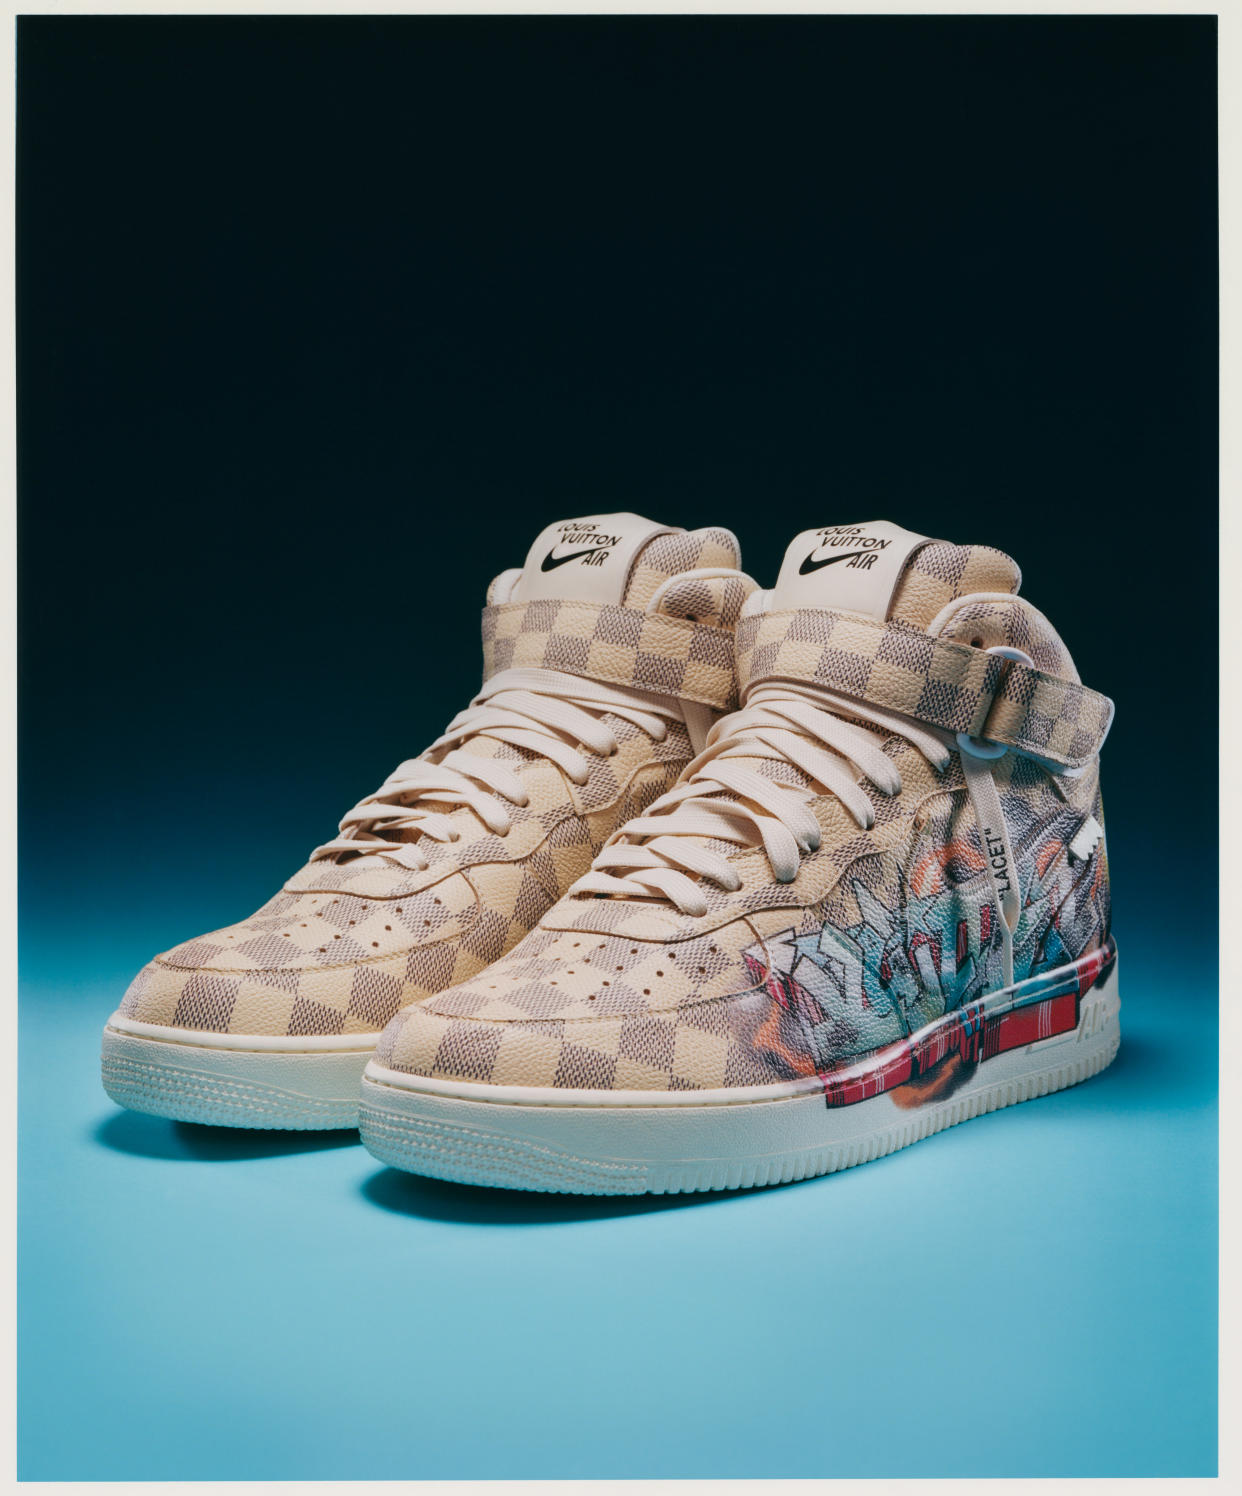 One of Louis Vuitton and Nike’s sneakers designed by Virgil Abloh. - Credit: Courtesy of Louis Vuitton